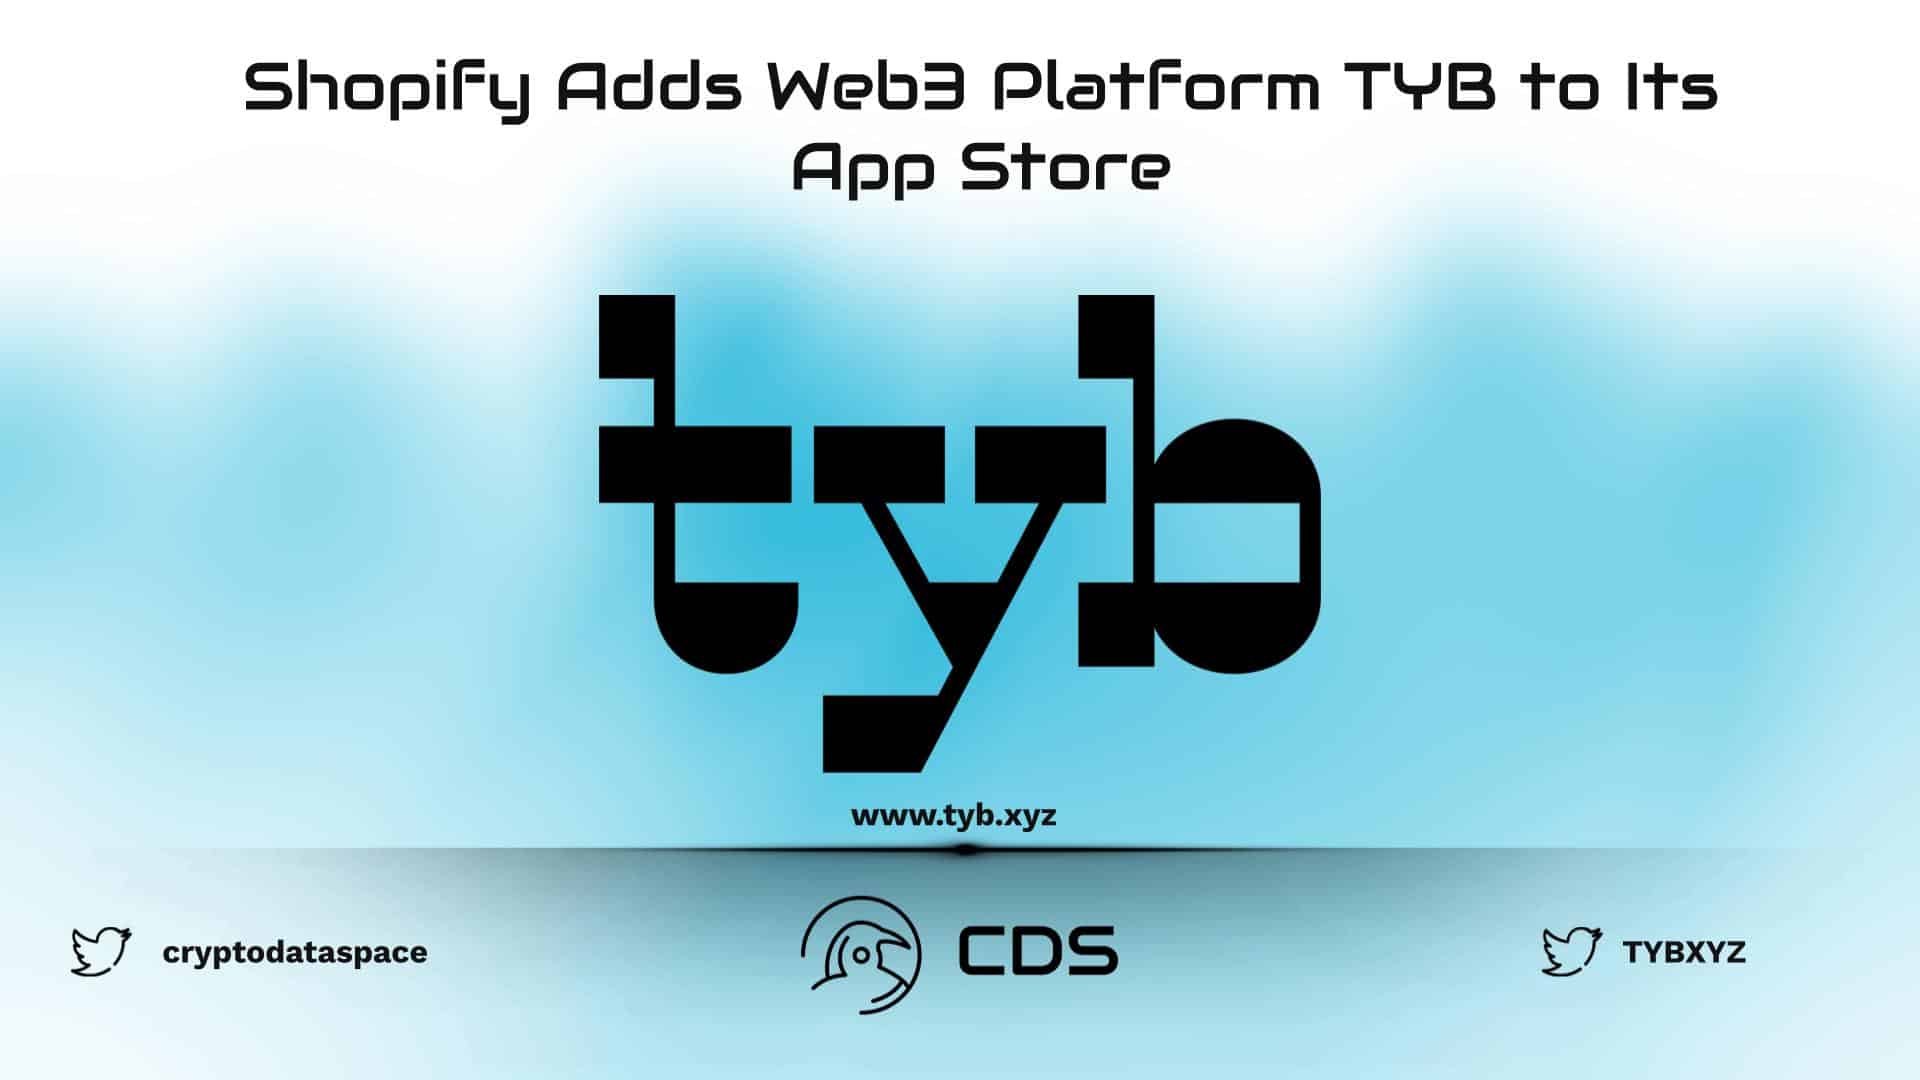 Shopify Adds Web3 Platform TYB to Its App Store